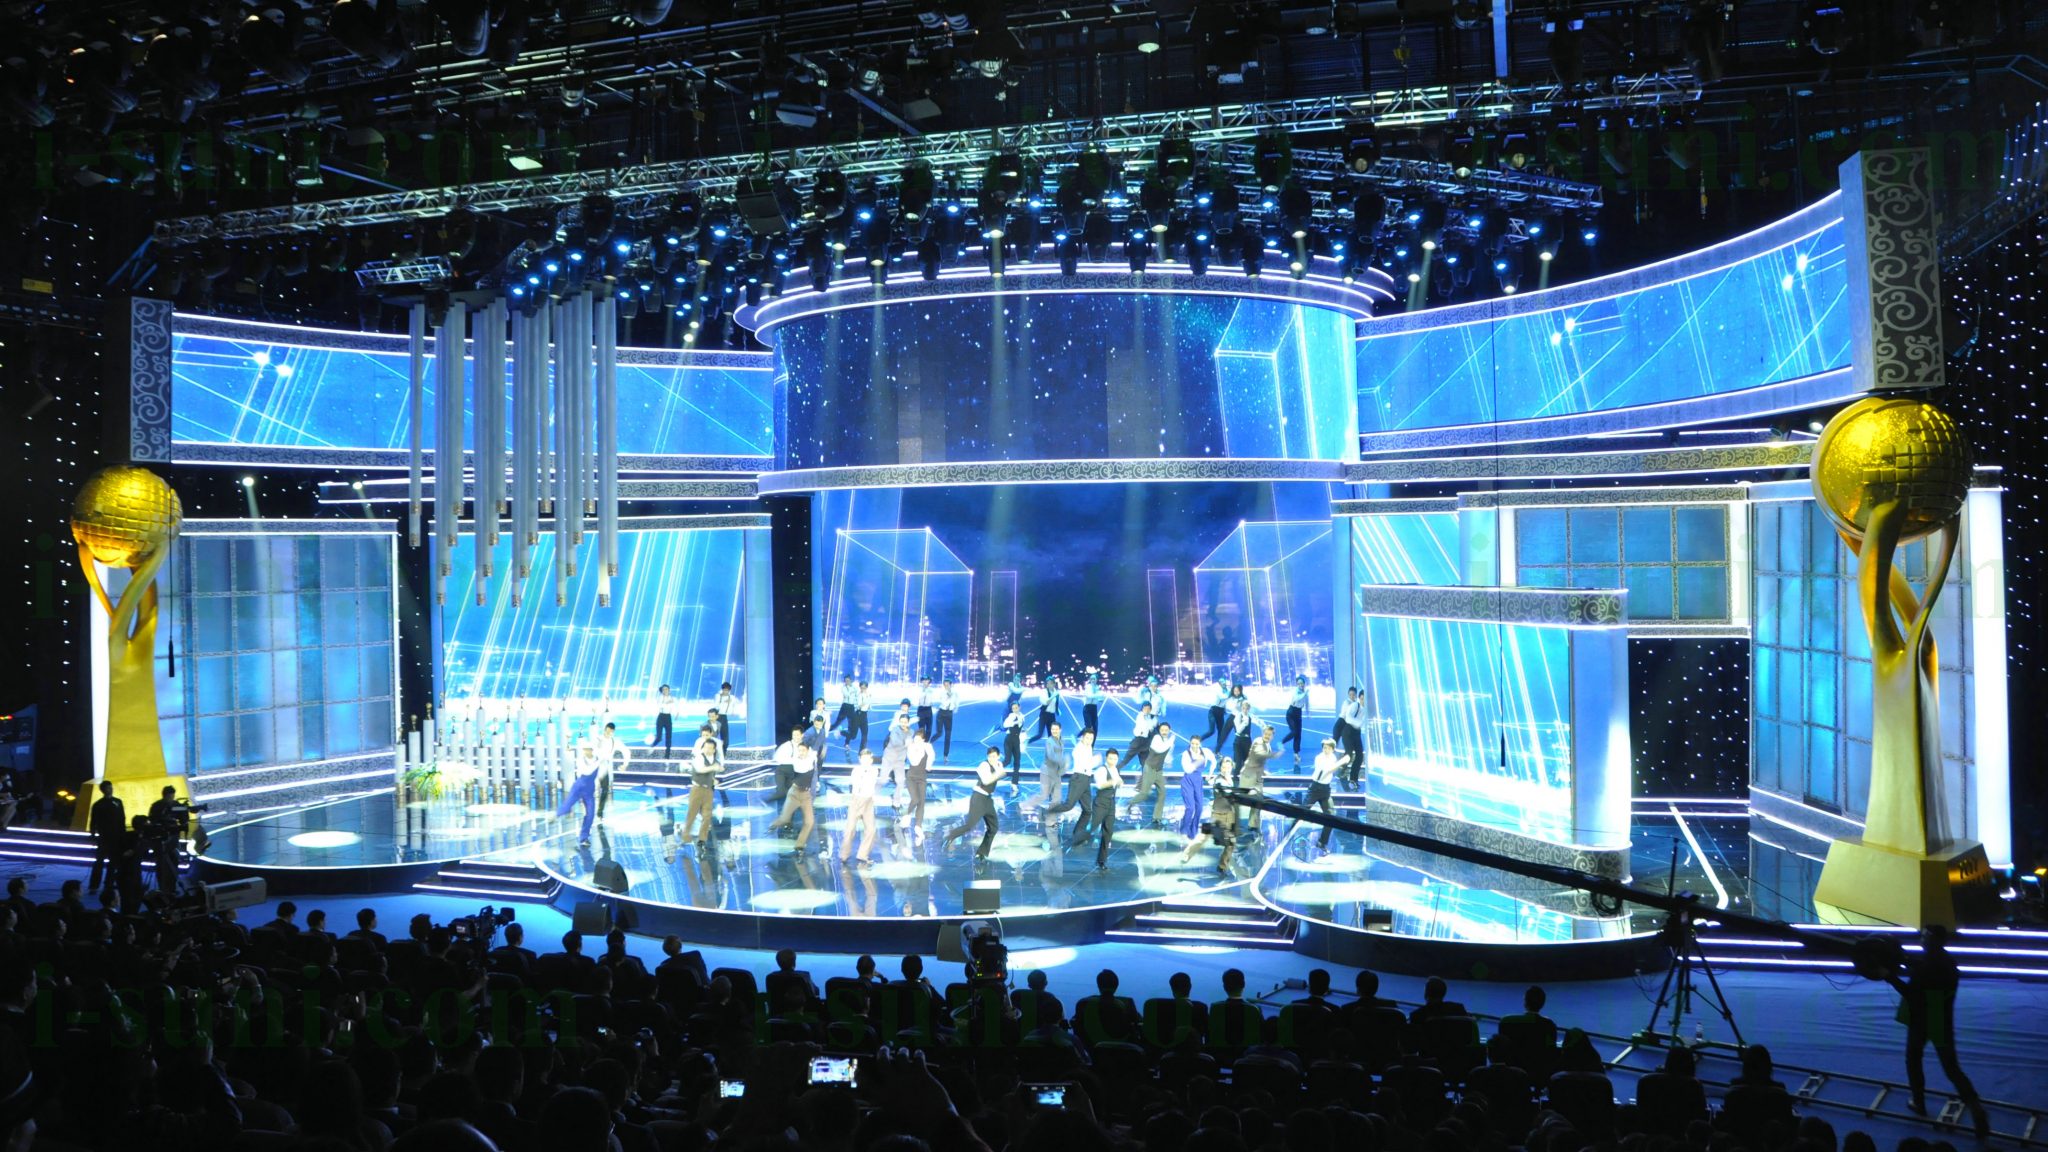 Image shows large digital display screens as the backdrop for a large stage production